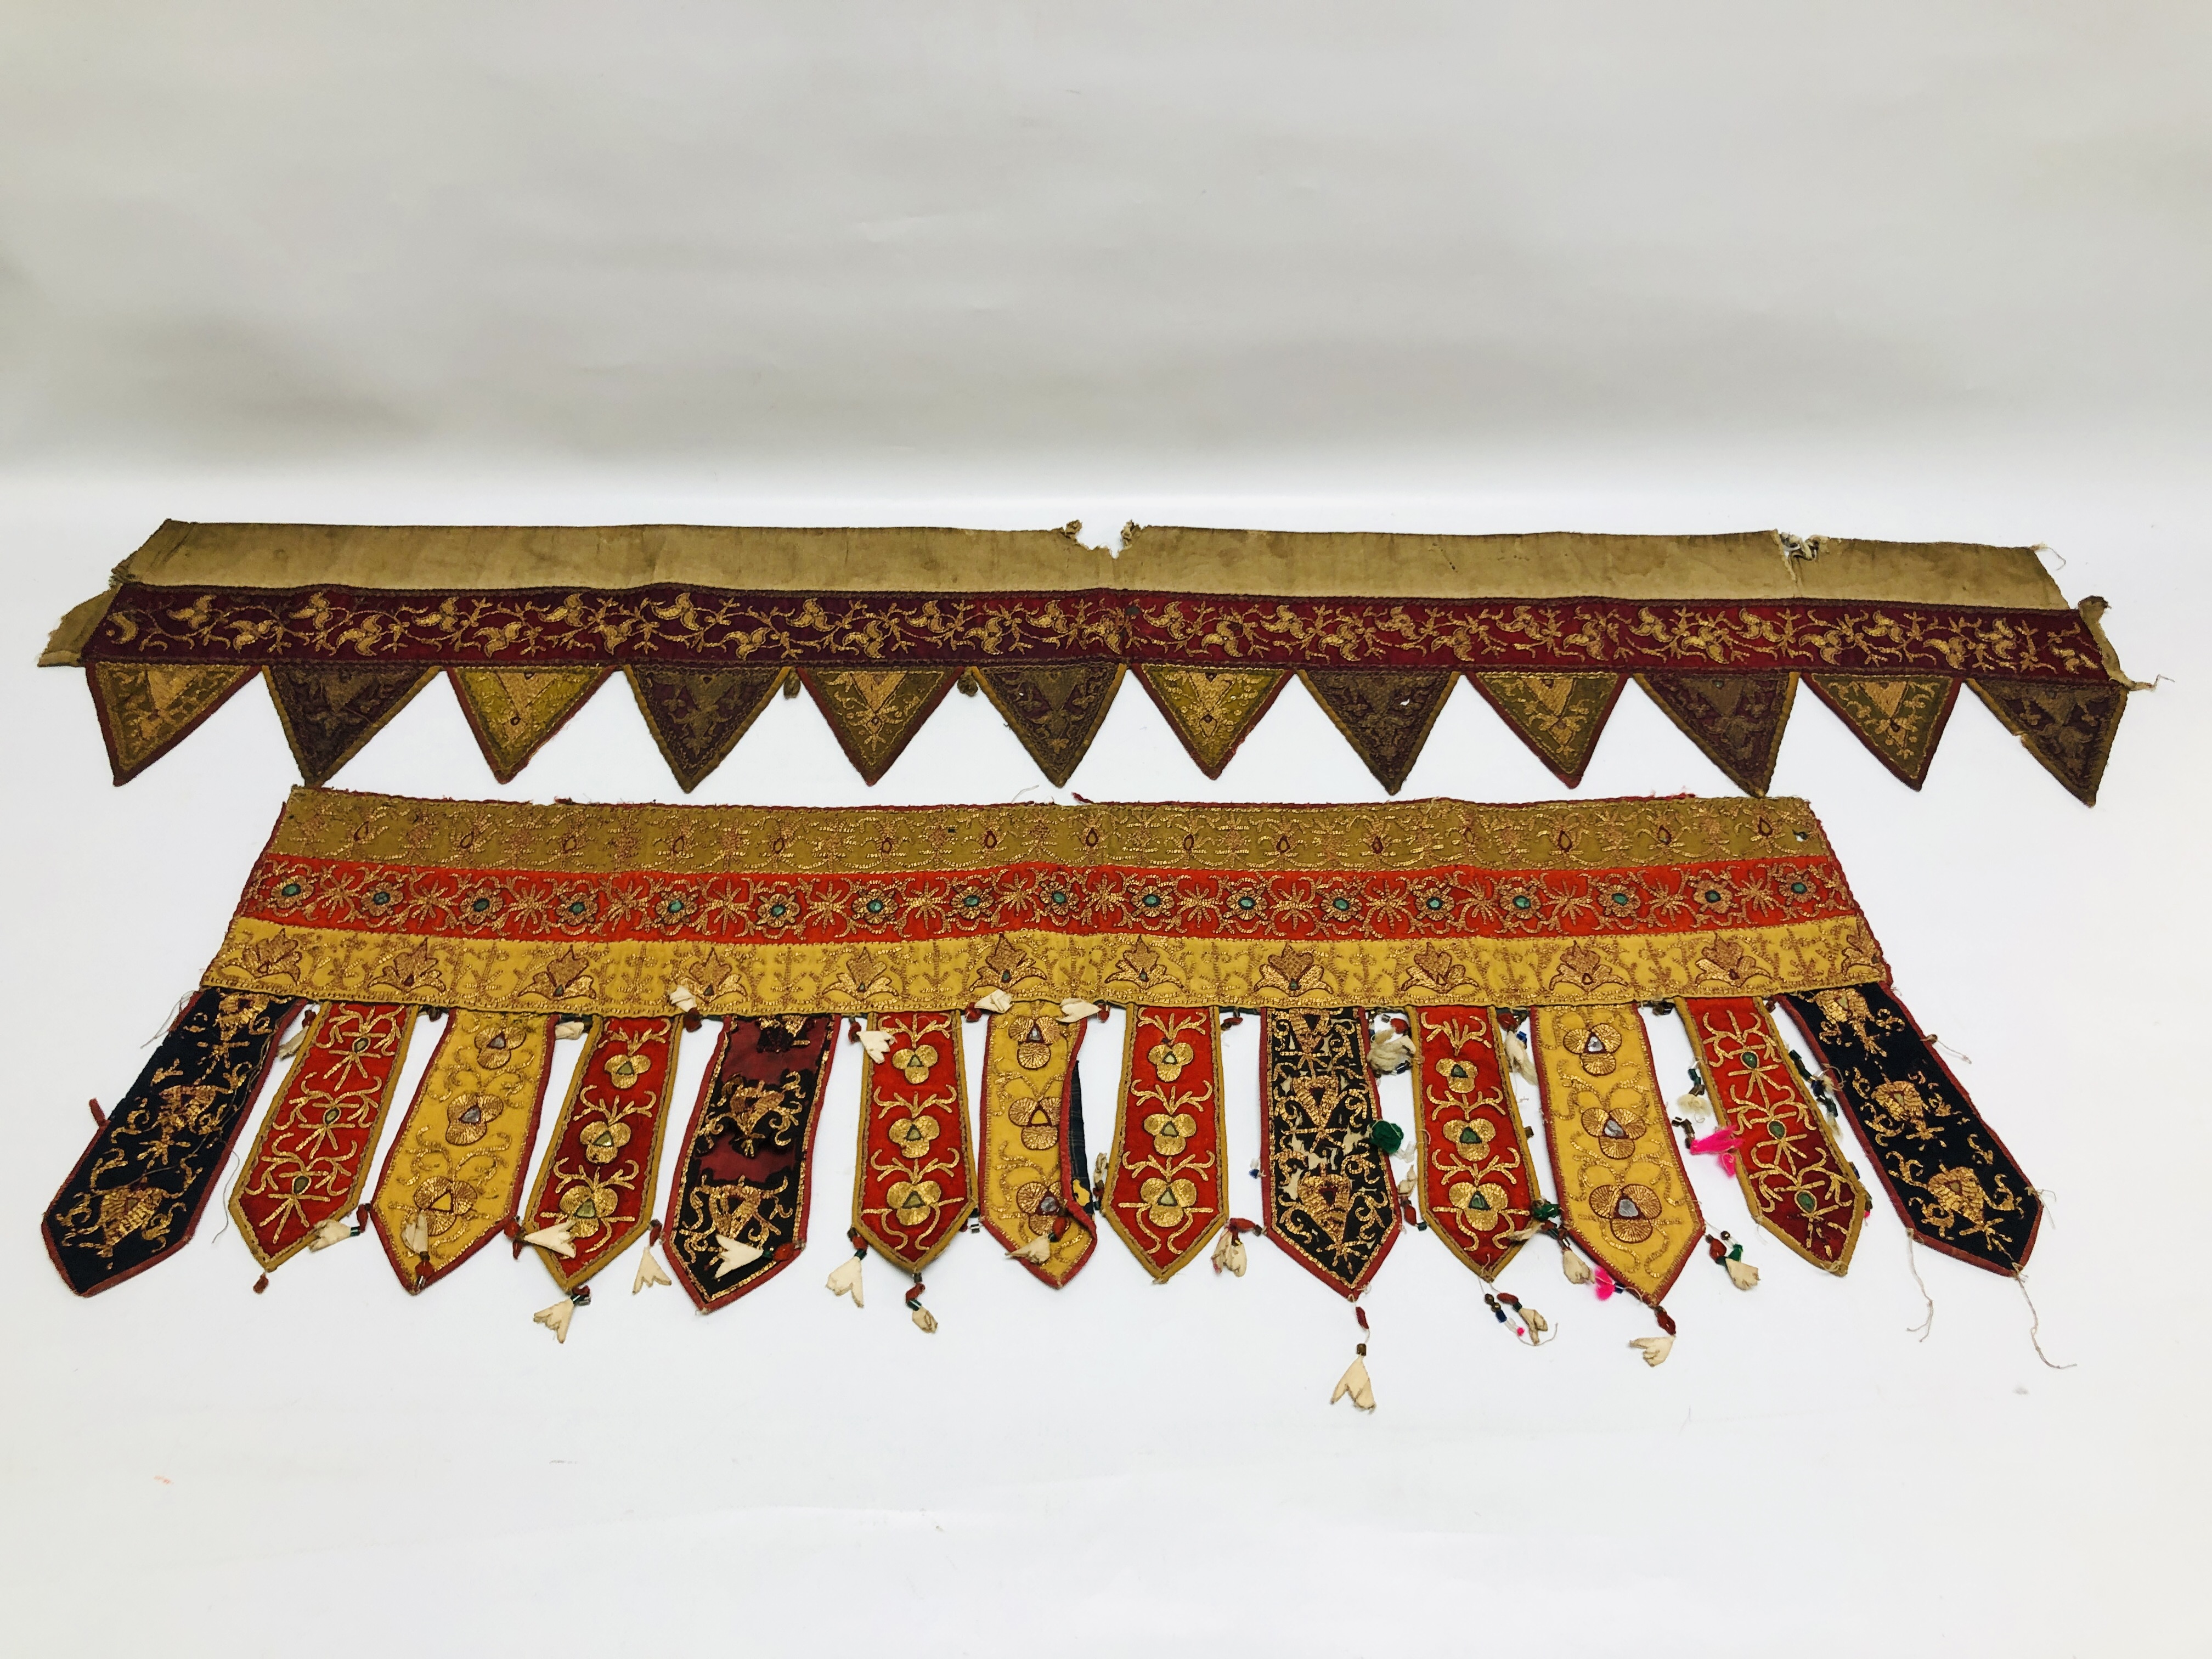 TWO AFGHAN EMBROIDERED DOOR HANGINGS WORKED WITH GOLD THREAD, 122CM AND 84CM.